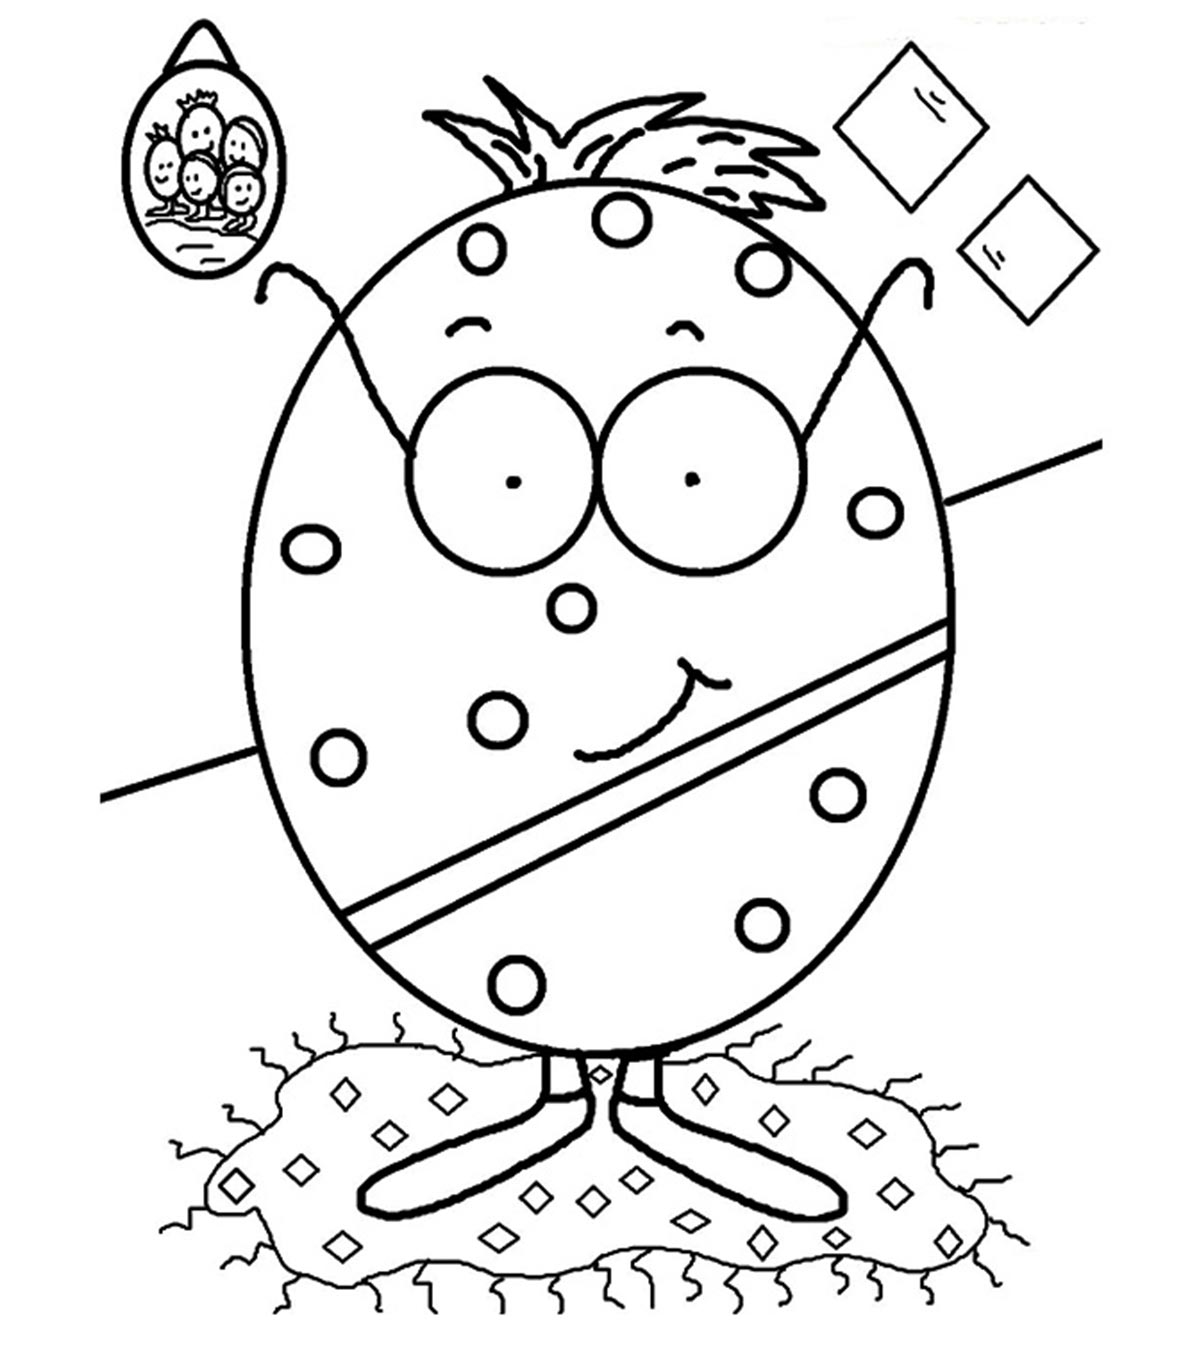 10 Lovely Egg Coloring Pages For Toddlers_image